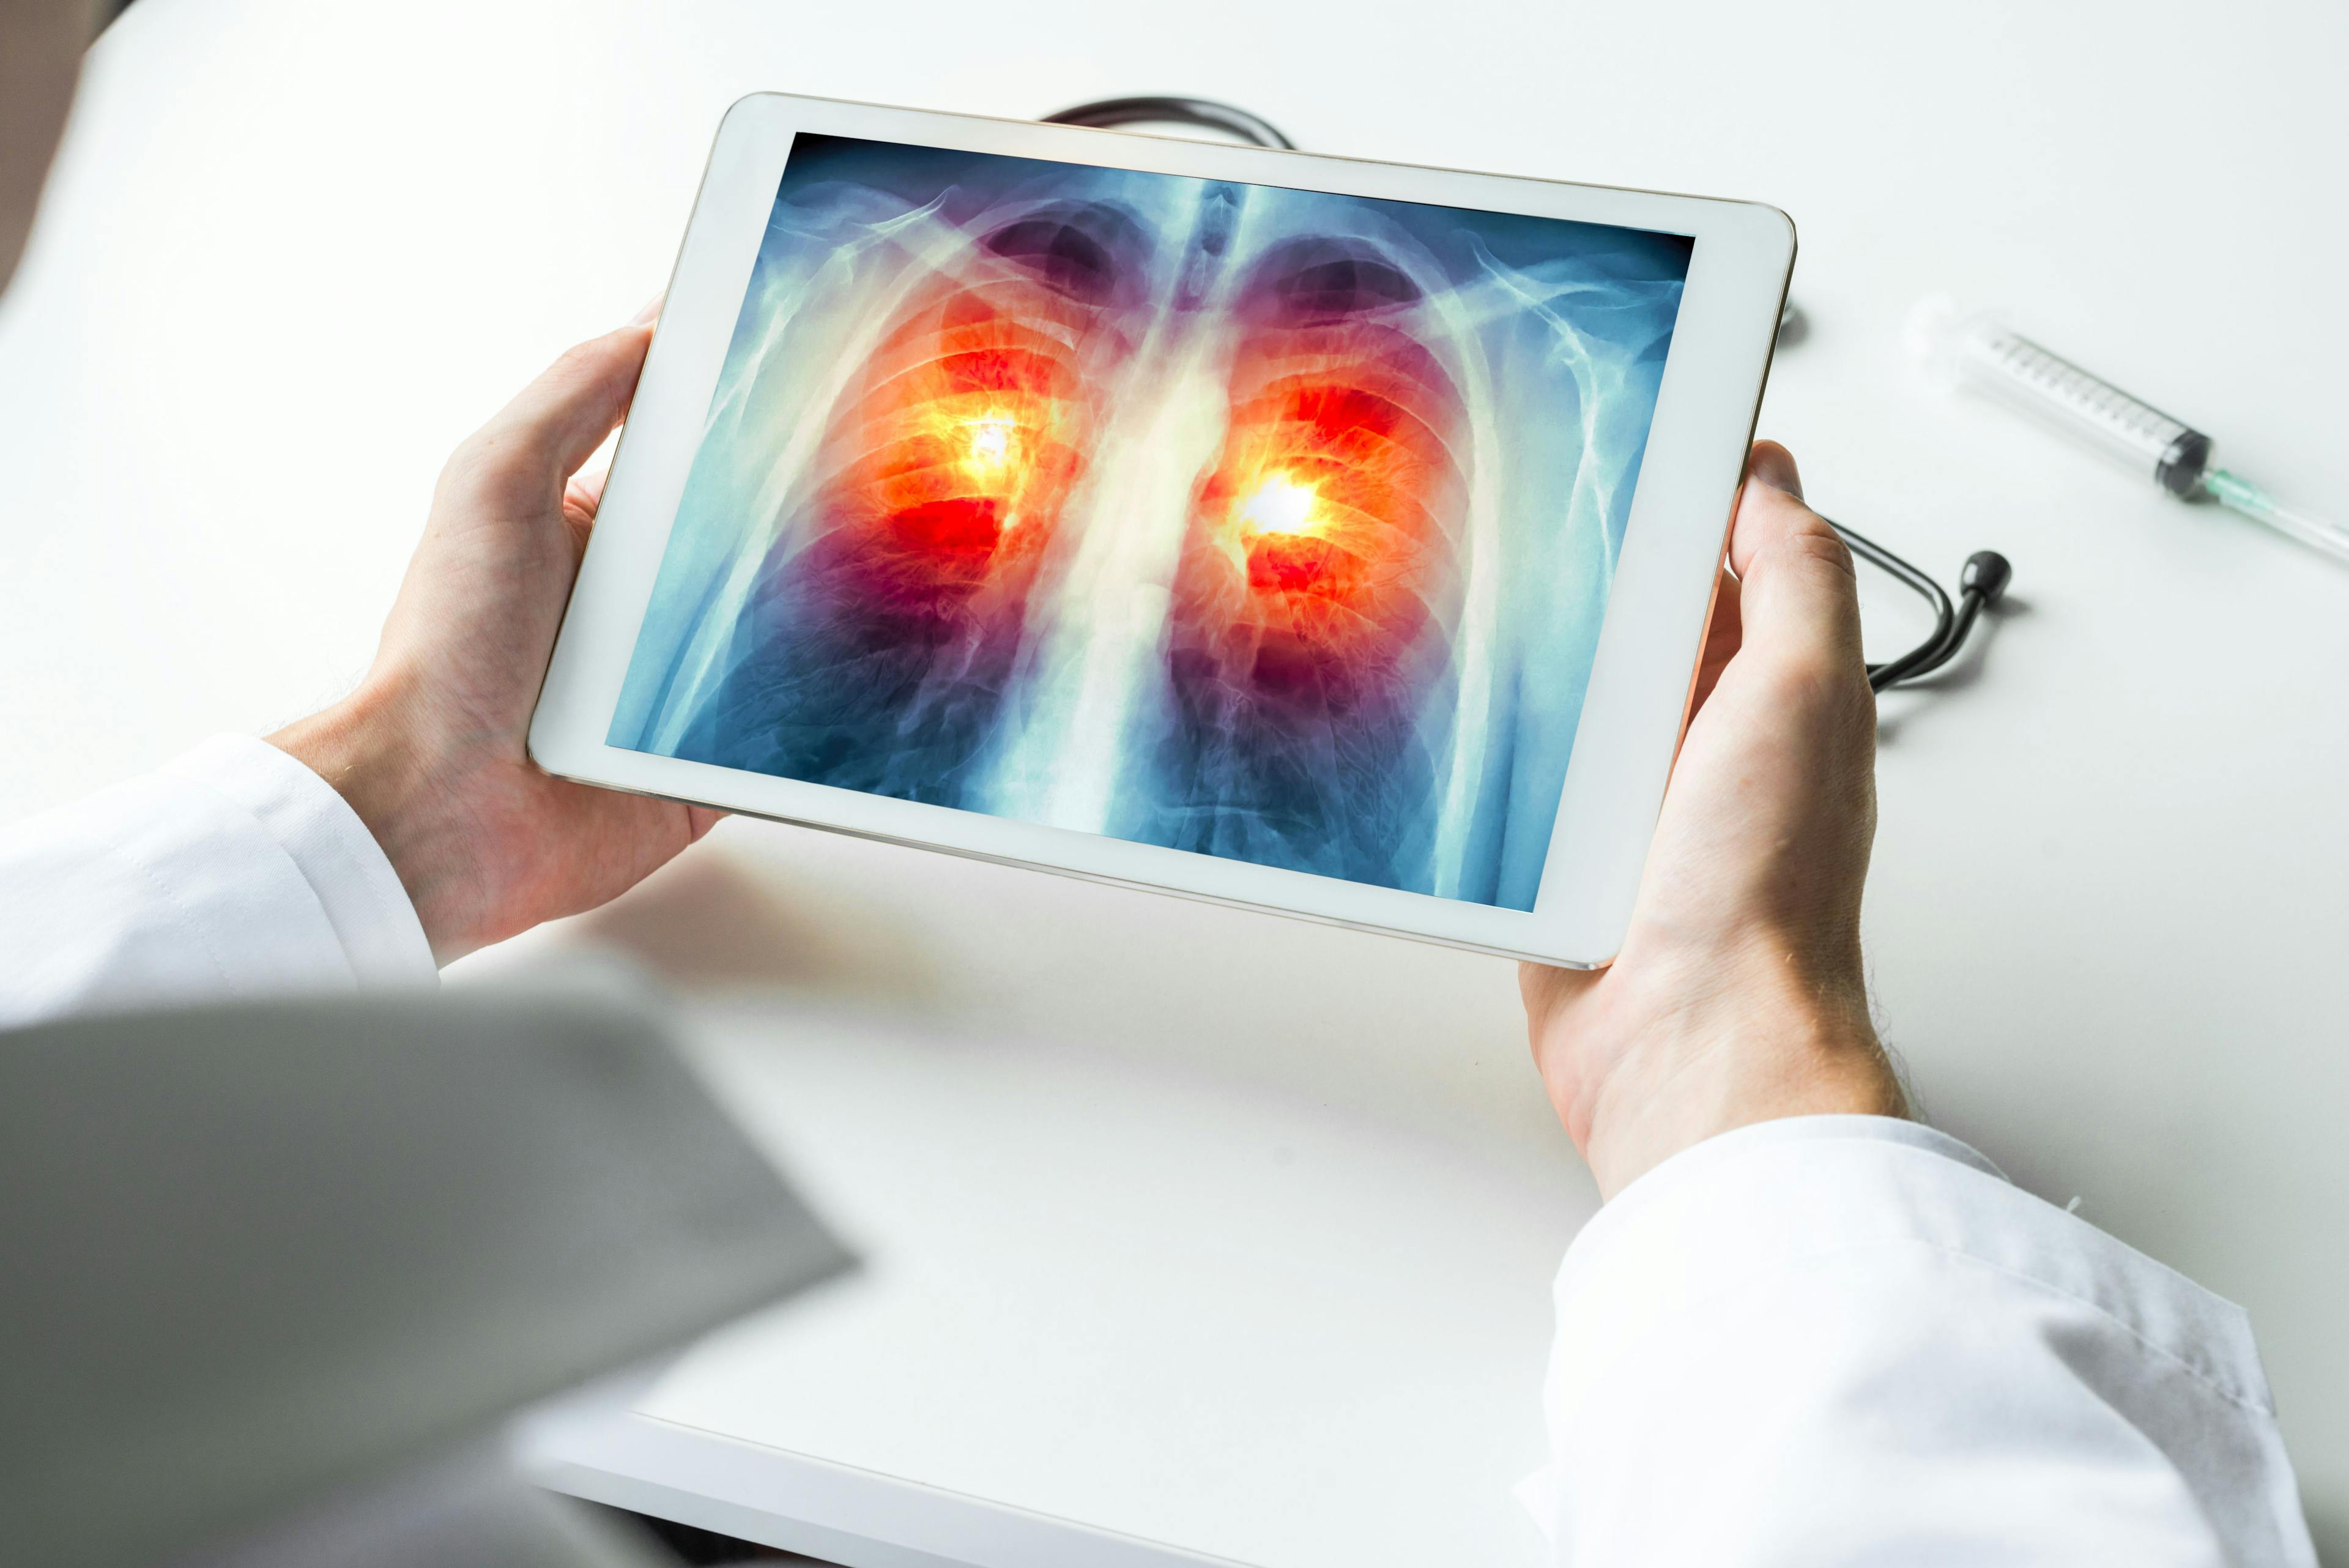 Doctor watching a xray of lung cancer on digital tablet. Radiology concept | Image Credit: © steph photographies - stock.adobe.com